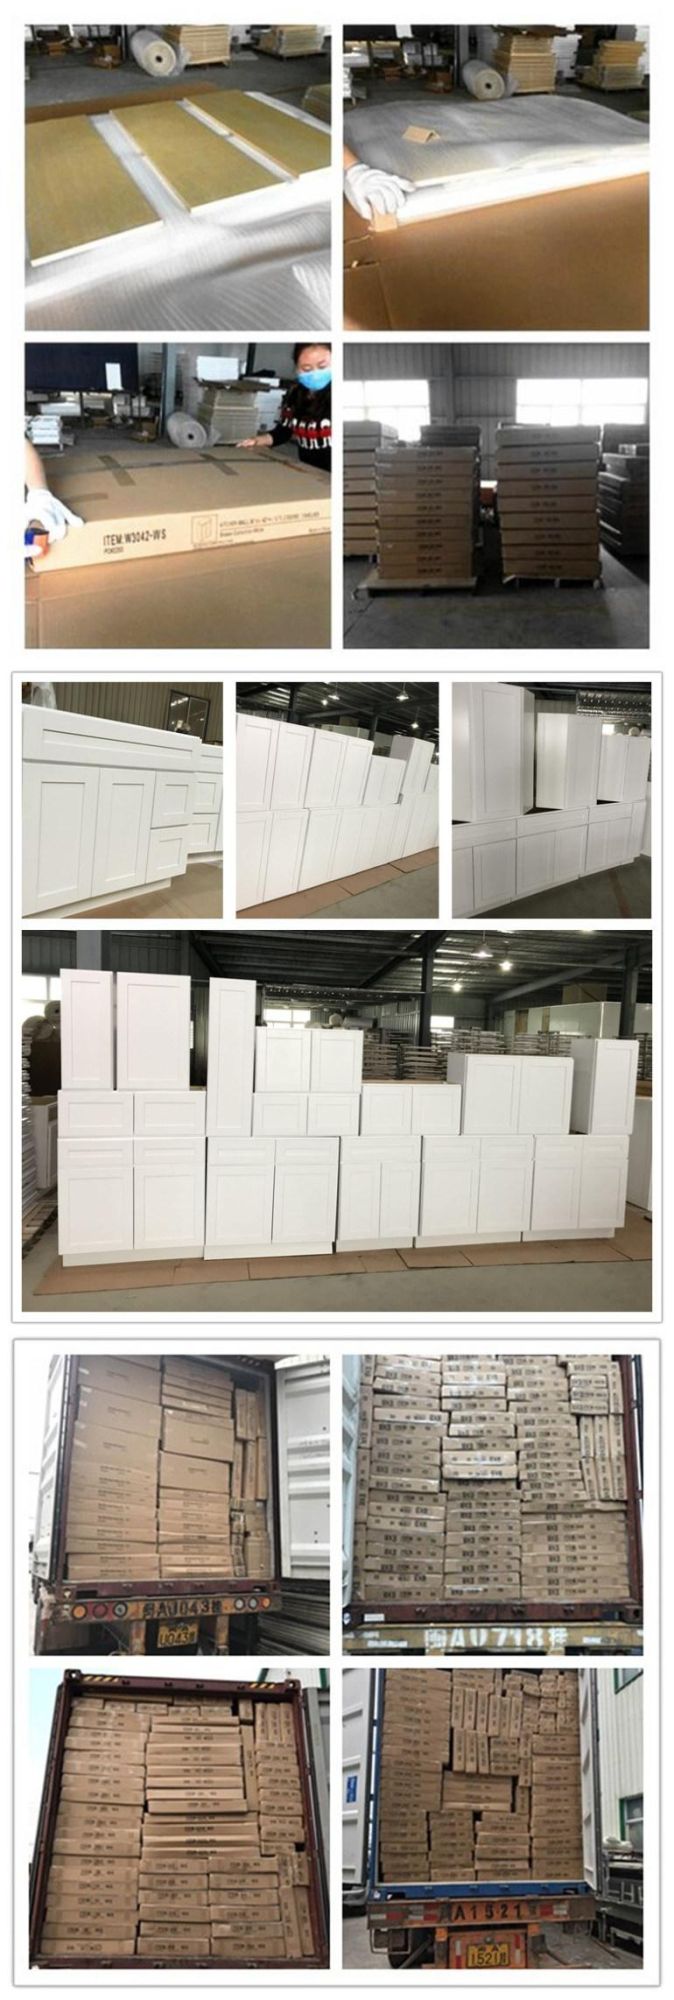 Large Painted Finish Solid Wood Kitchen Cabinets in Antique White